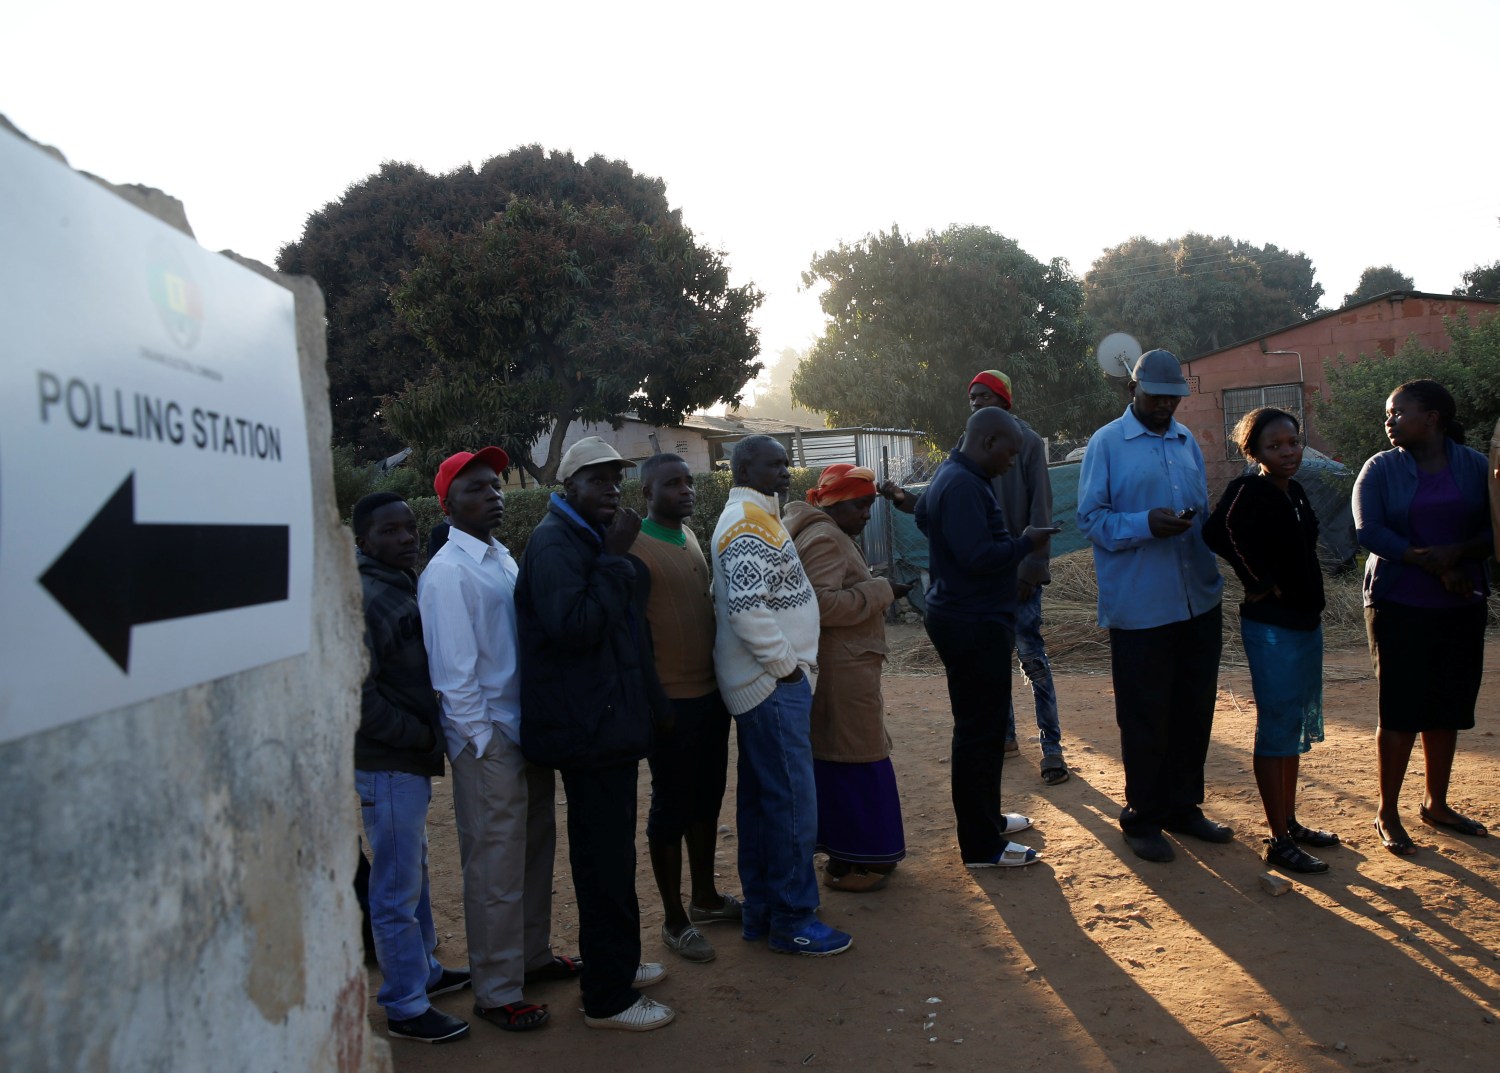 People line up to cast their ballots to vote in the country's general elections in Kwekwe, Zimbabwe July 30, 2018.   REUTERS/Philimon Bulawayo - RC19E1045AB0